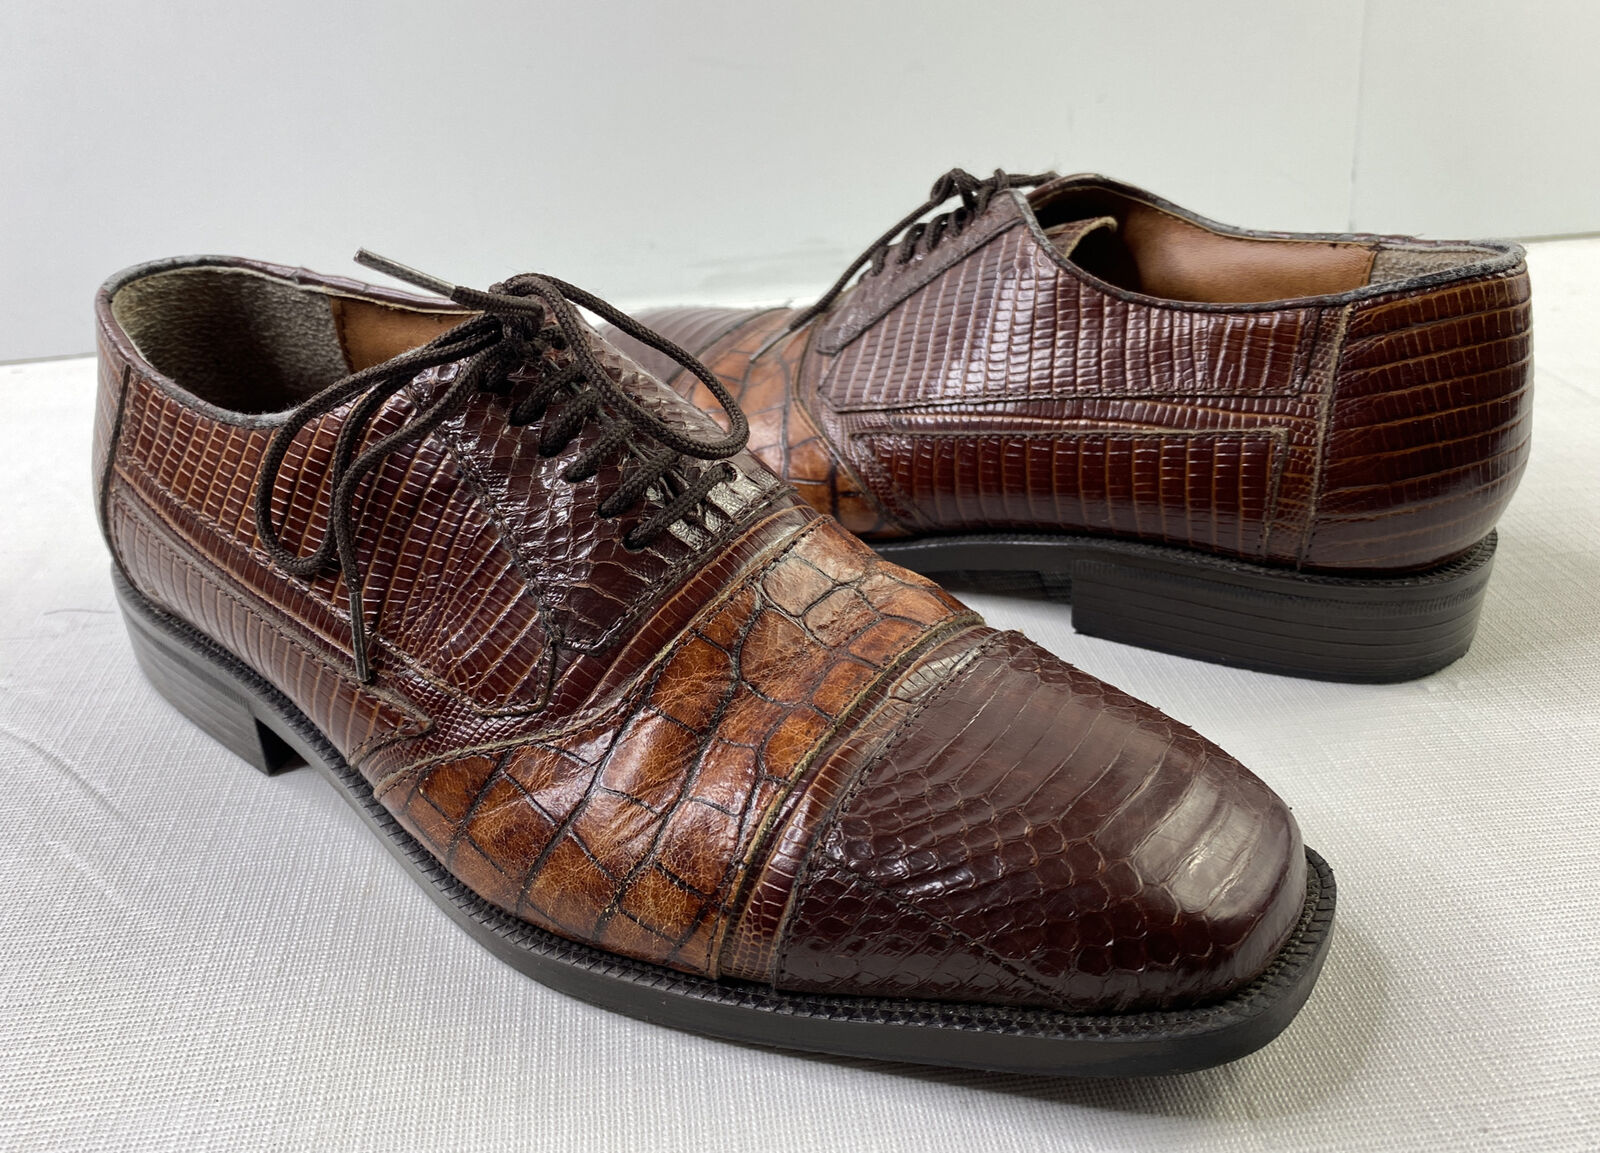 Stacy Adams Genuine Max 84% OFF Snake Skin Dress Man#039;s Shoes 8 1 5 Max 84% OFF Size